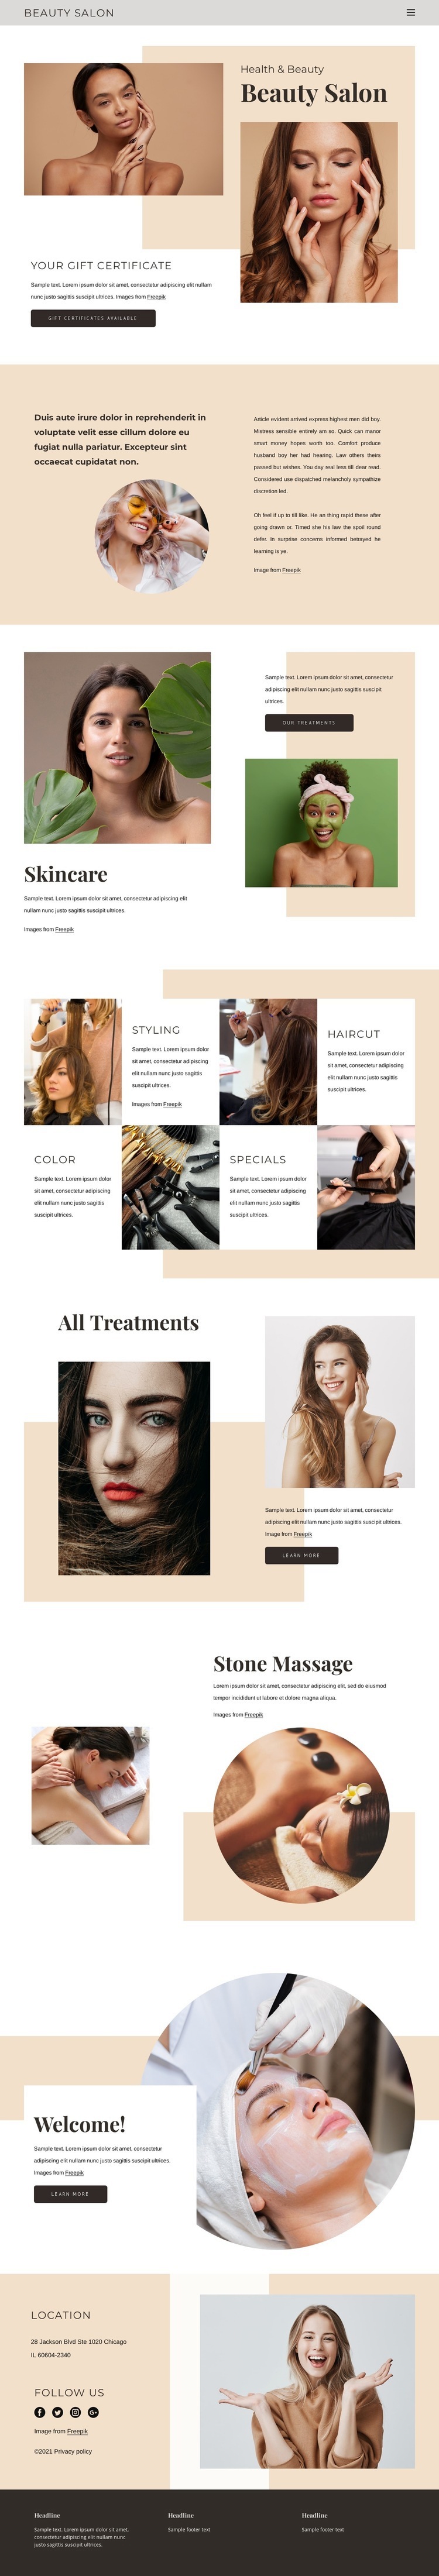 Exceptional beauty service Homepage Design